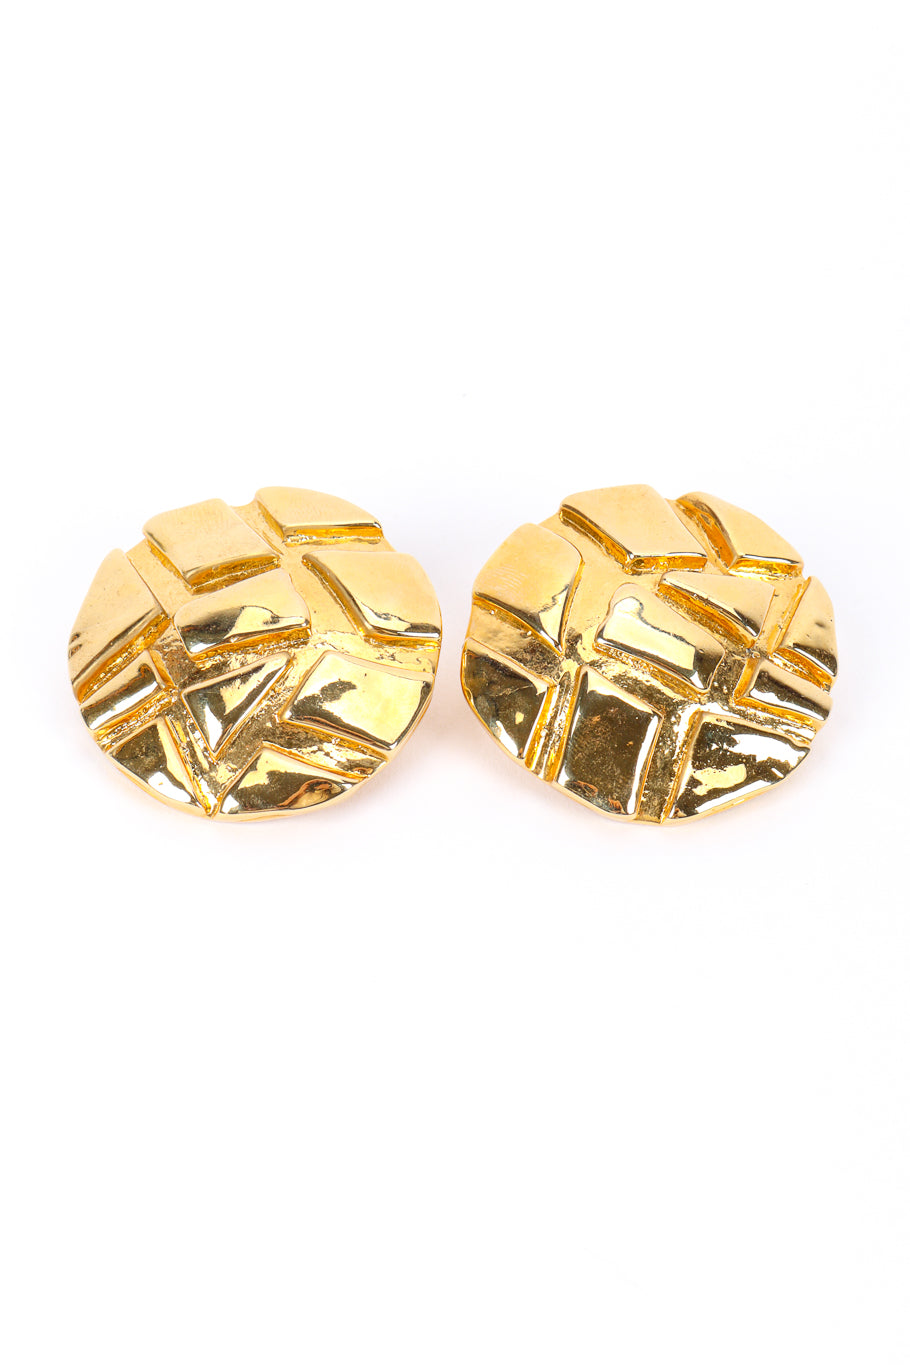 Vintage Givenchy Embossed Disc Earrings front @recessla